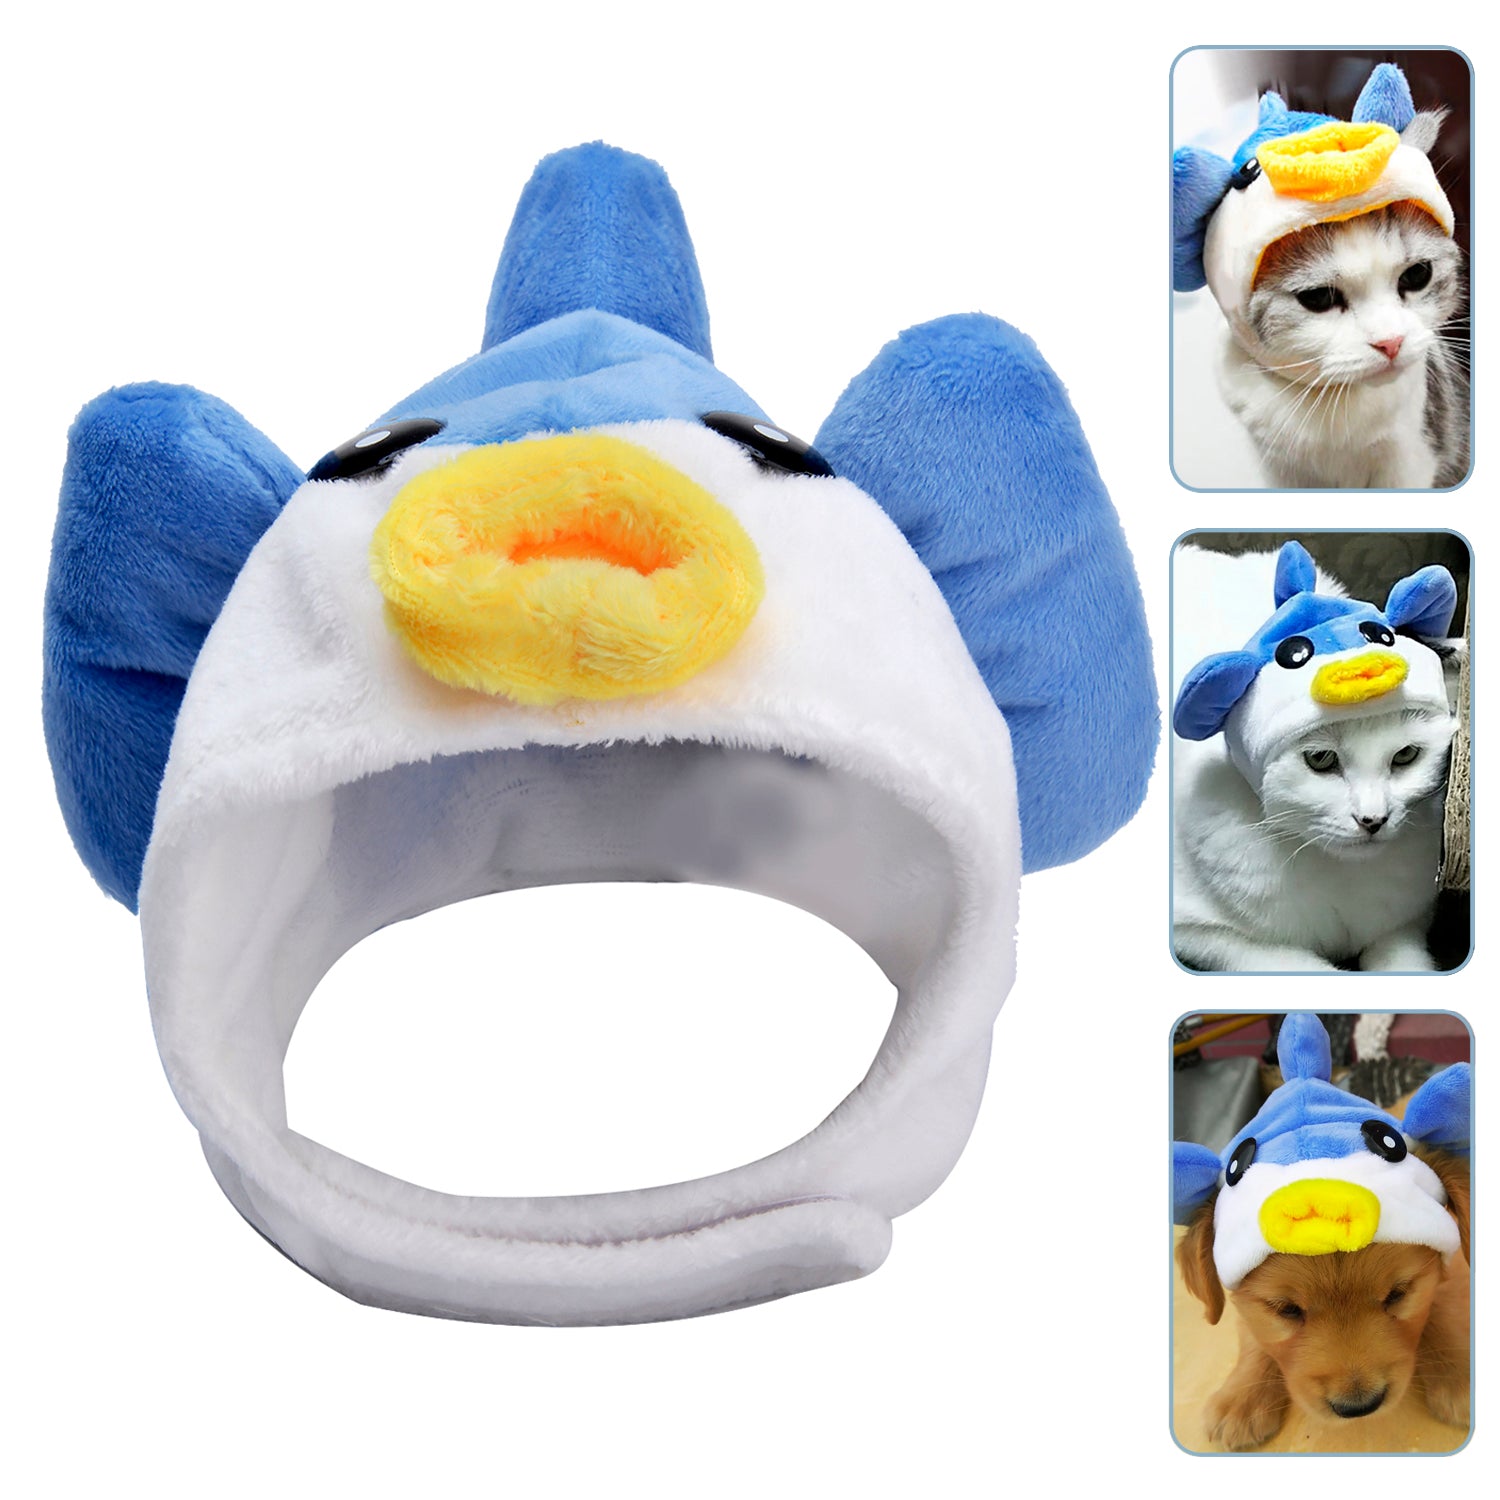 2019 New Cute Cartoon Pet Hat Breathable Lovely Animal Design Cat Costume Pet Headwear Supplies For Kittens-ebowsos